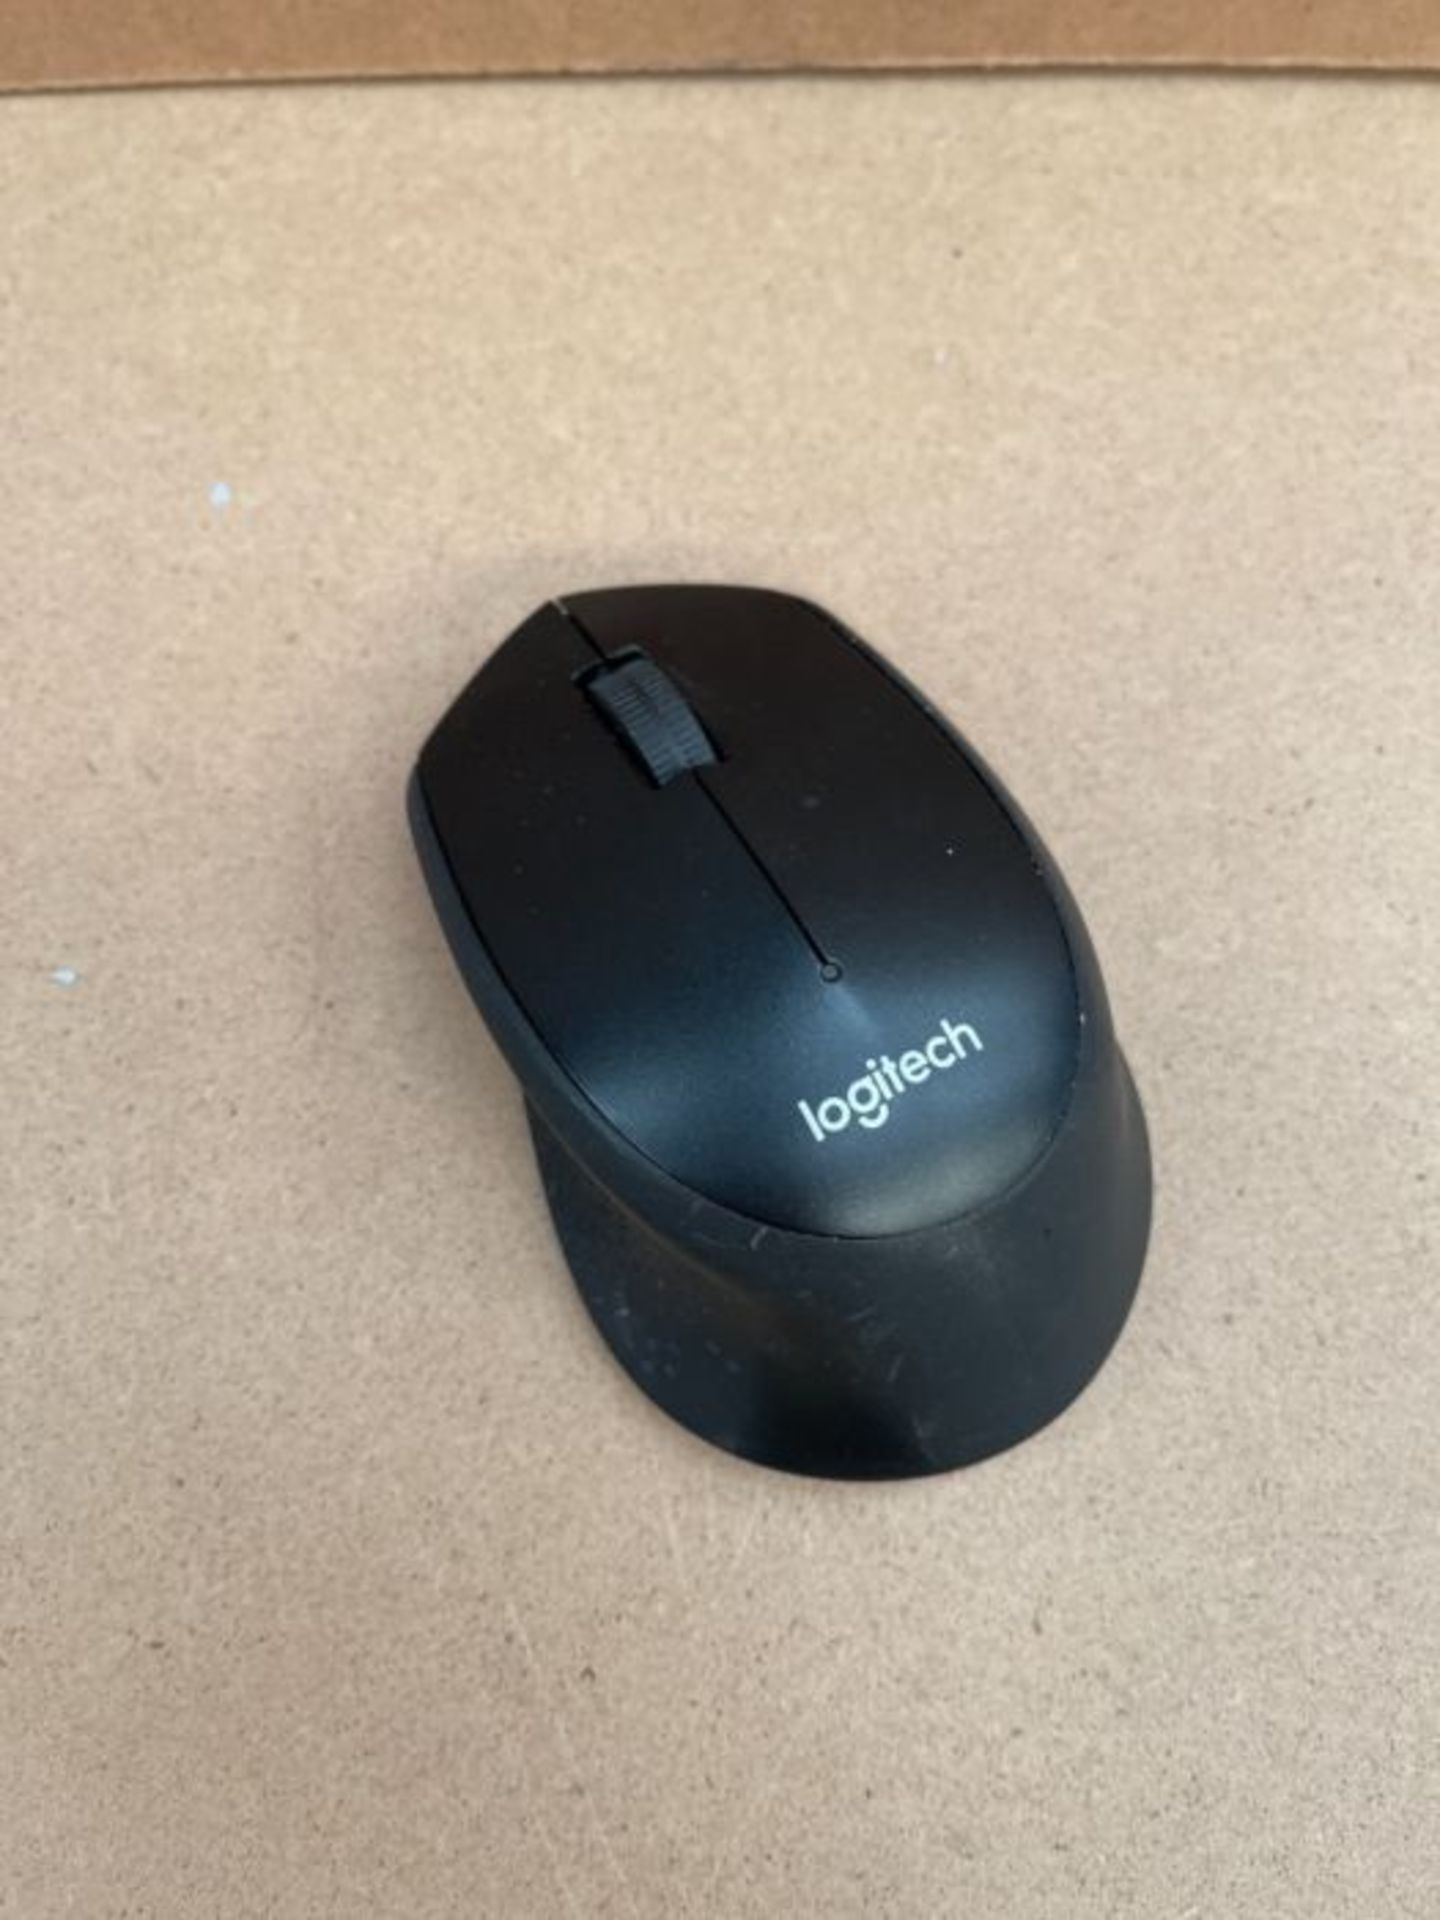 Logitech M330 Silent Plus Wireless Mouse, 2.4GHz with USB Nano Receiver, 1000 DPI Opti - Image 2 of 2